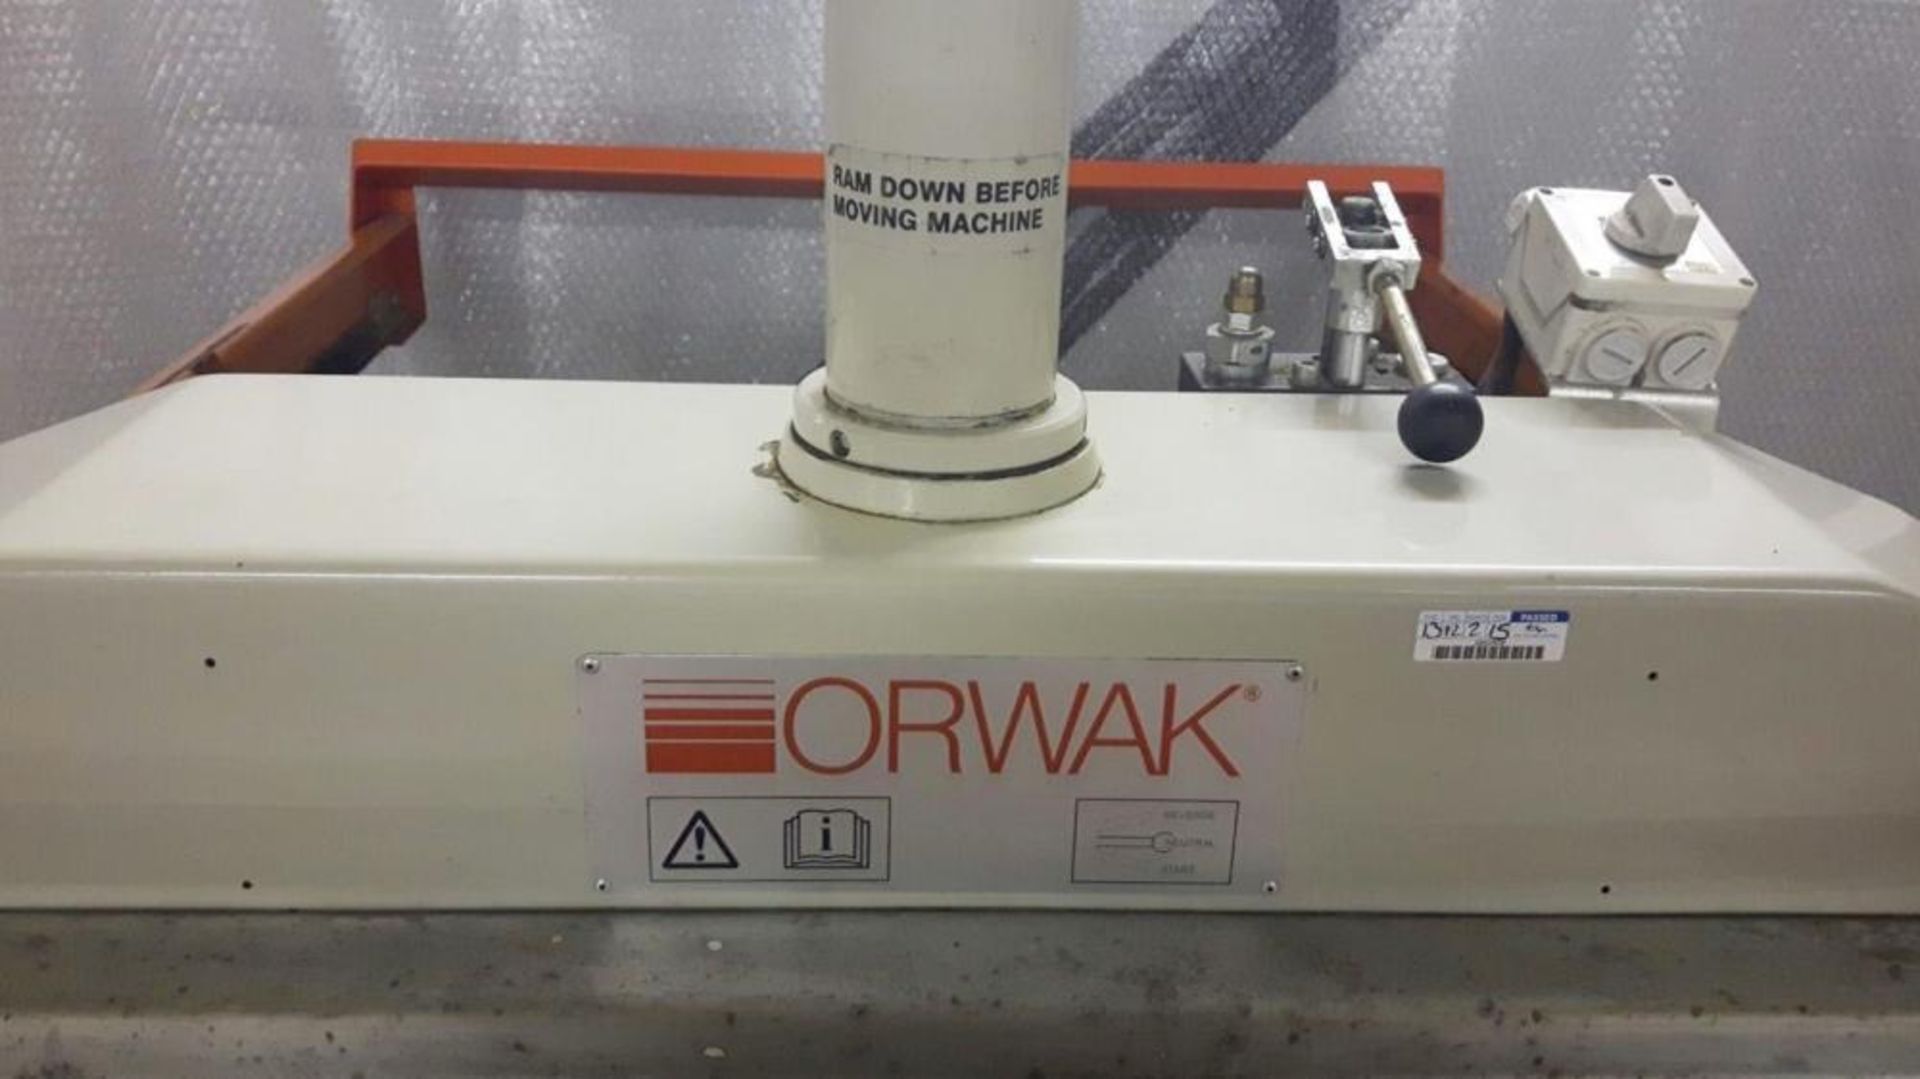 1 x Orwak 5010 Top Loading Baler -  Fully Tested and Working, Very Good Condition - CL011 - Location - Image 11 of 11